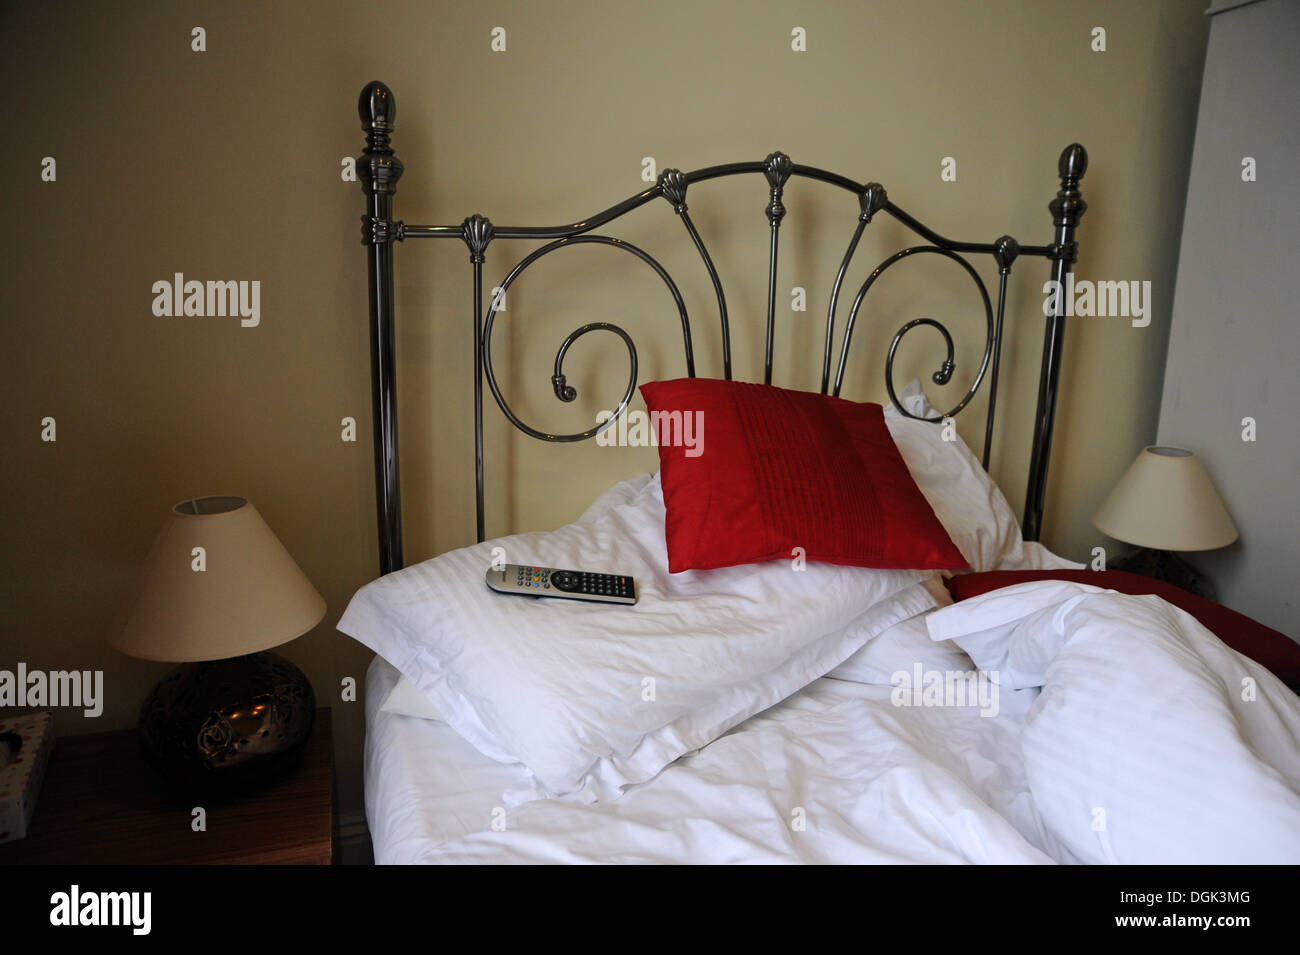 Unmade bed with tv remote control on pillows Stock Photo